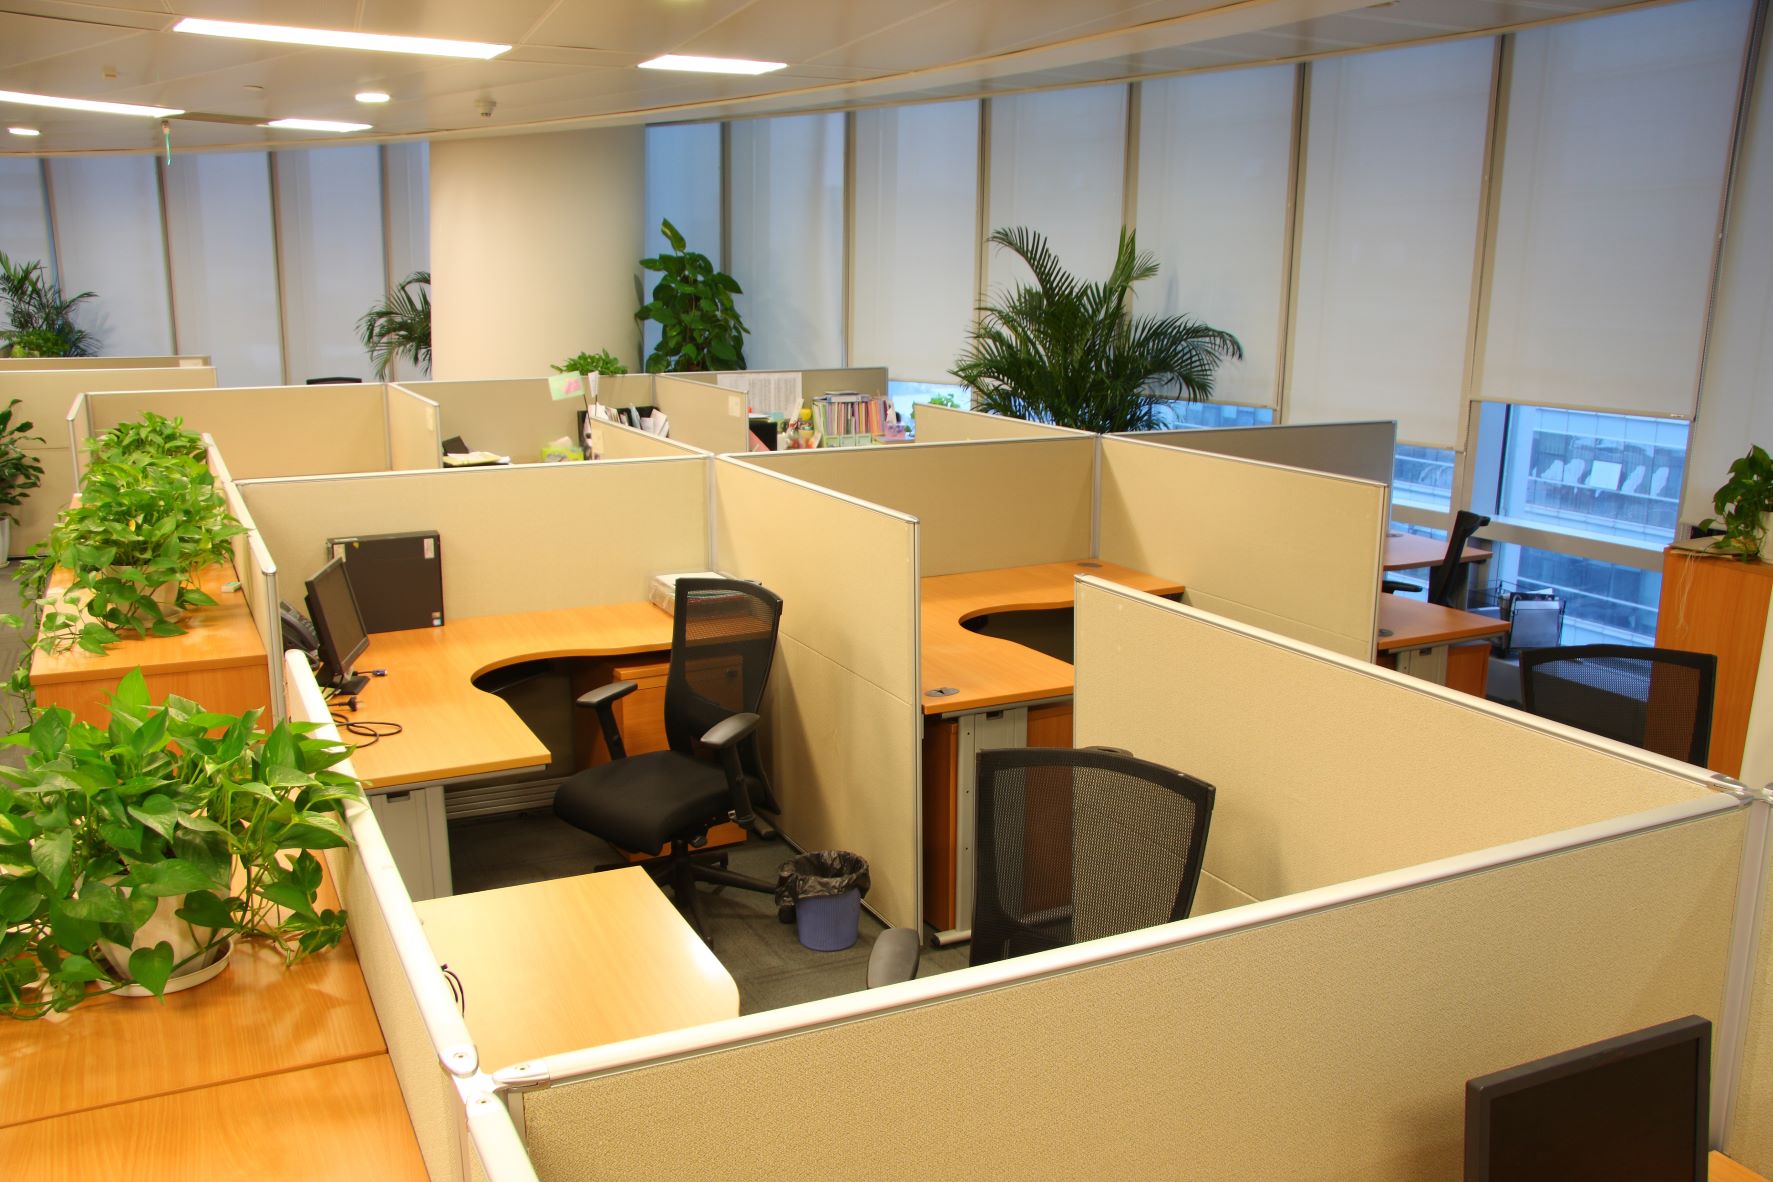 What Makes a Well-Designed Cubicle